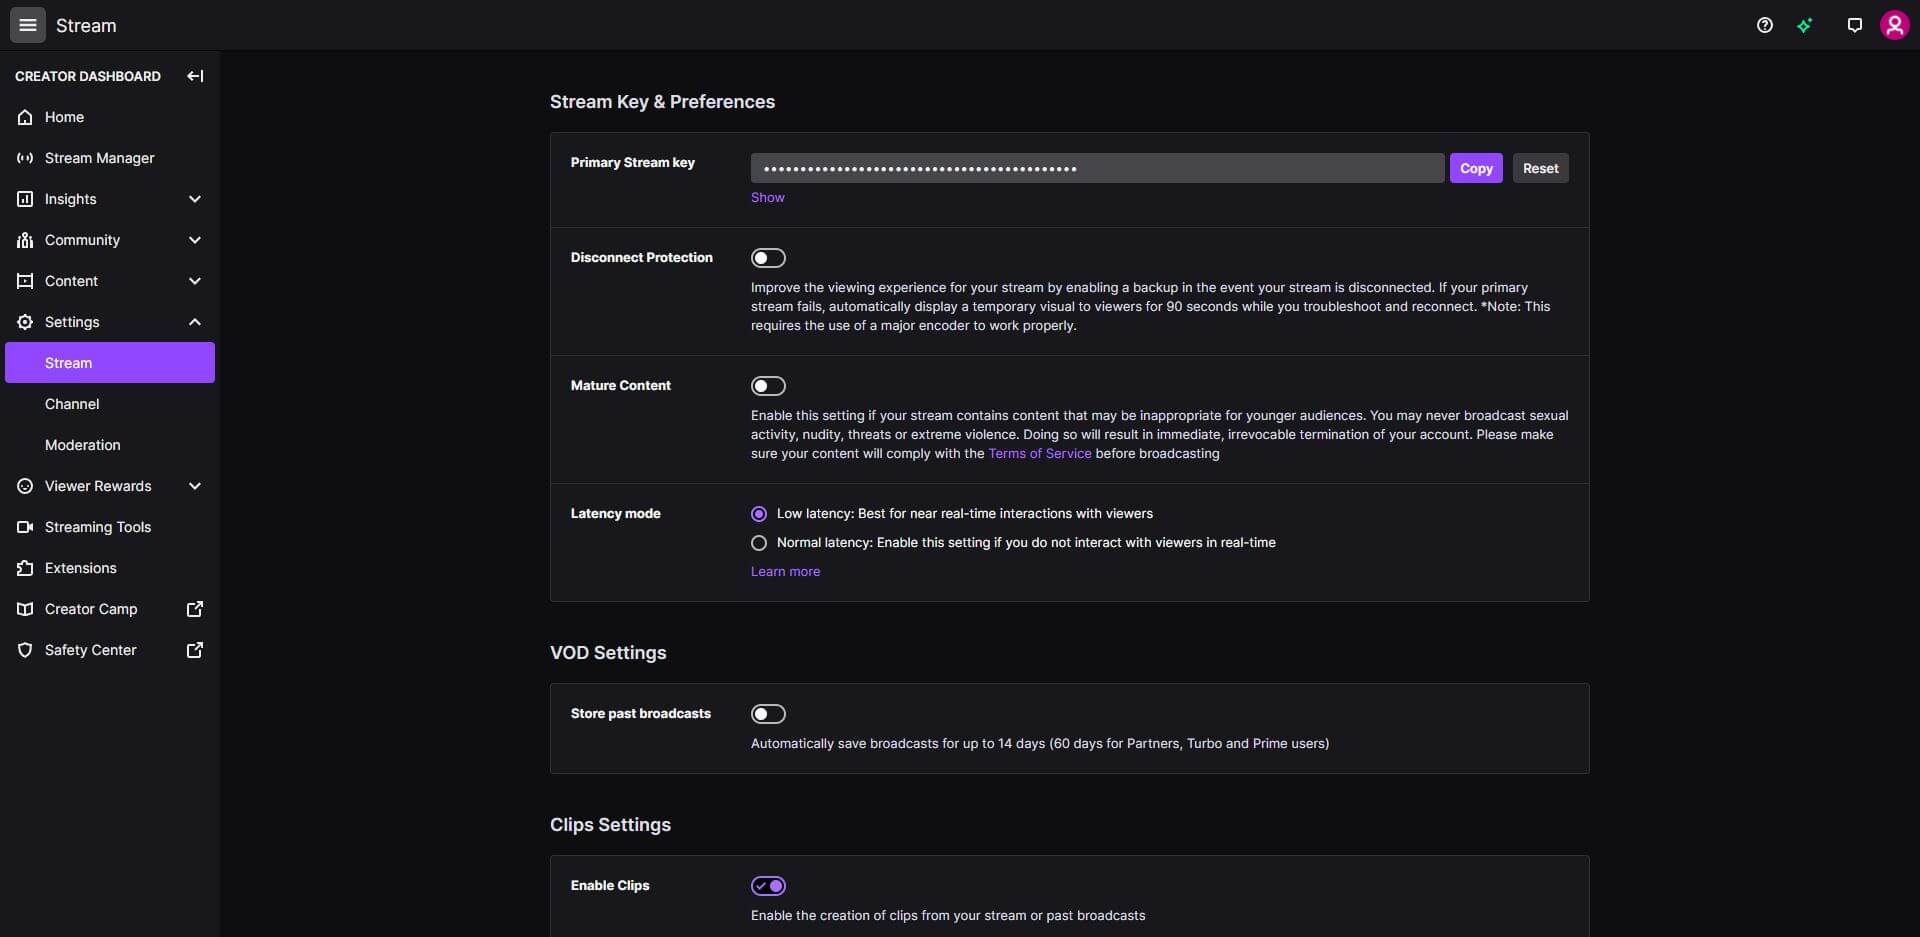 The page showing how to reset your Twitch stream key